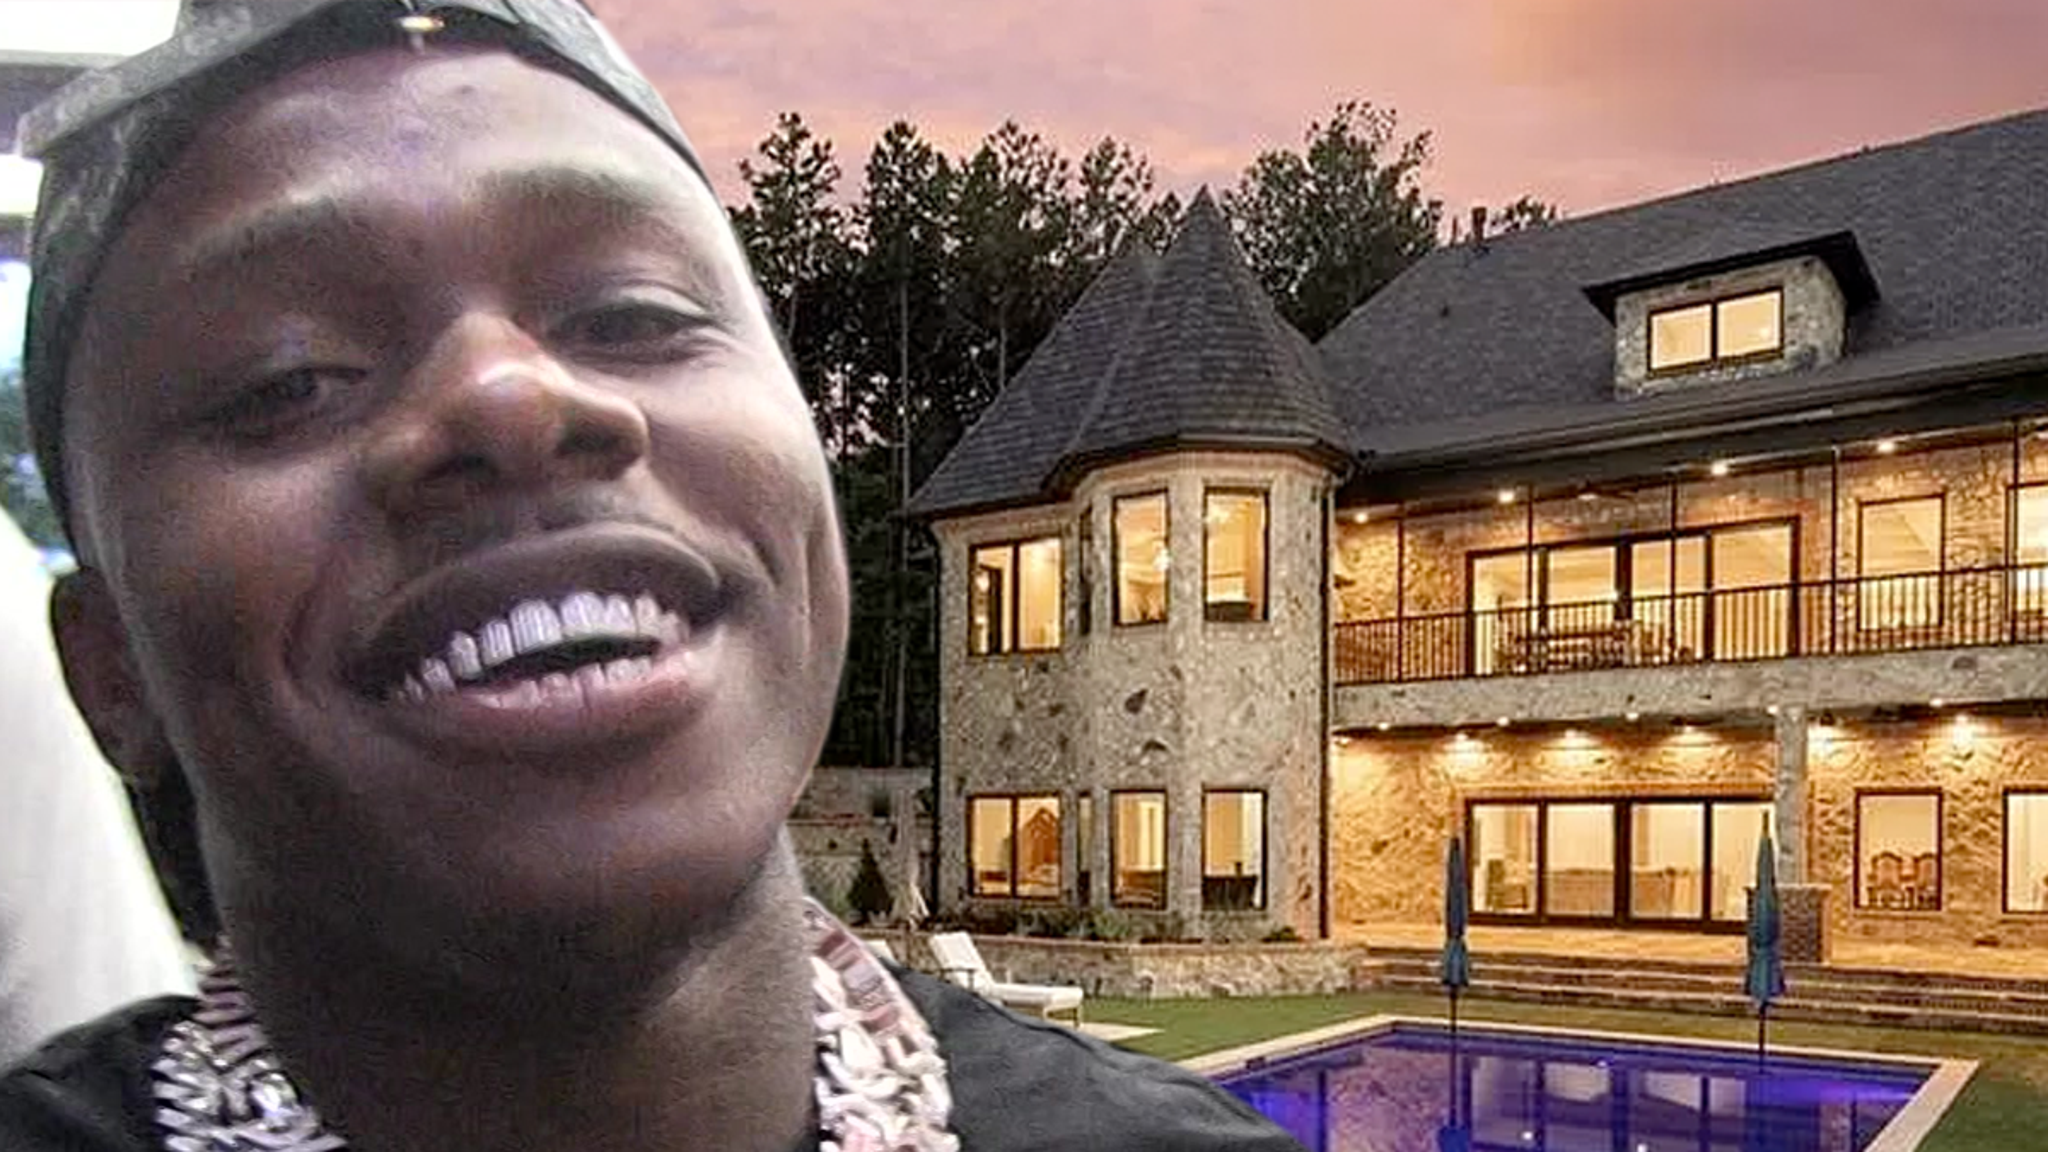 DaBaby Sends Well-Wishes to Trespasser He Shot